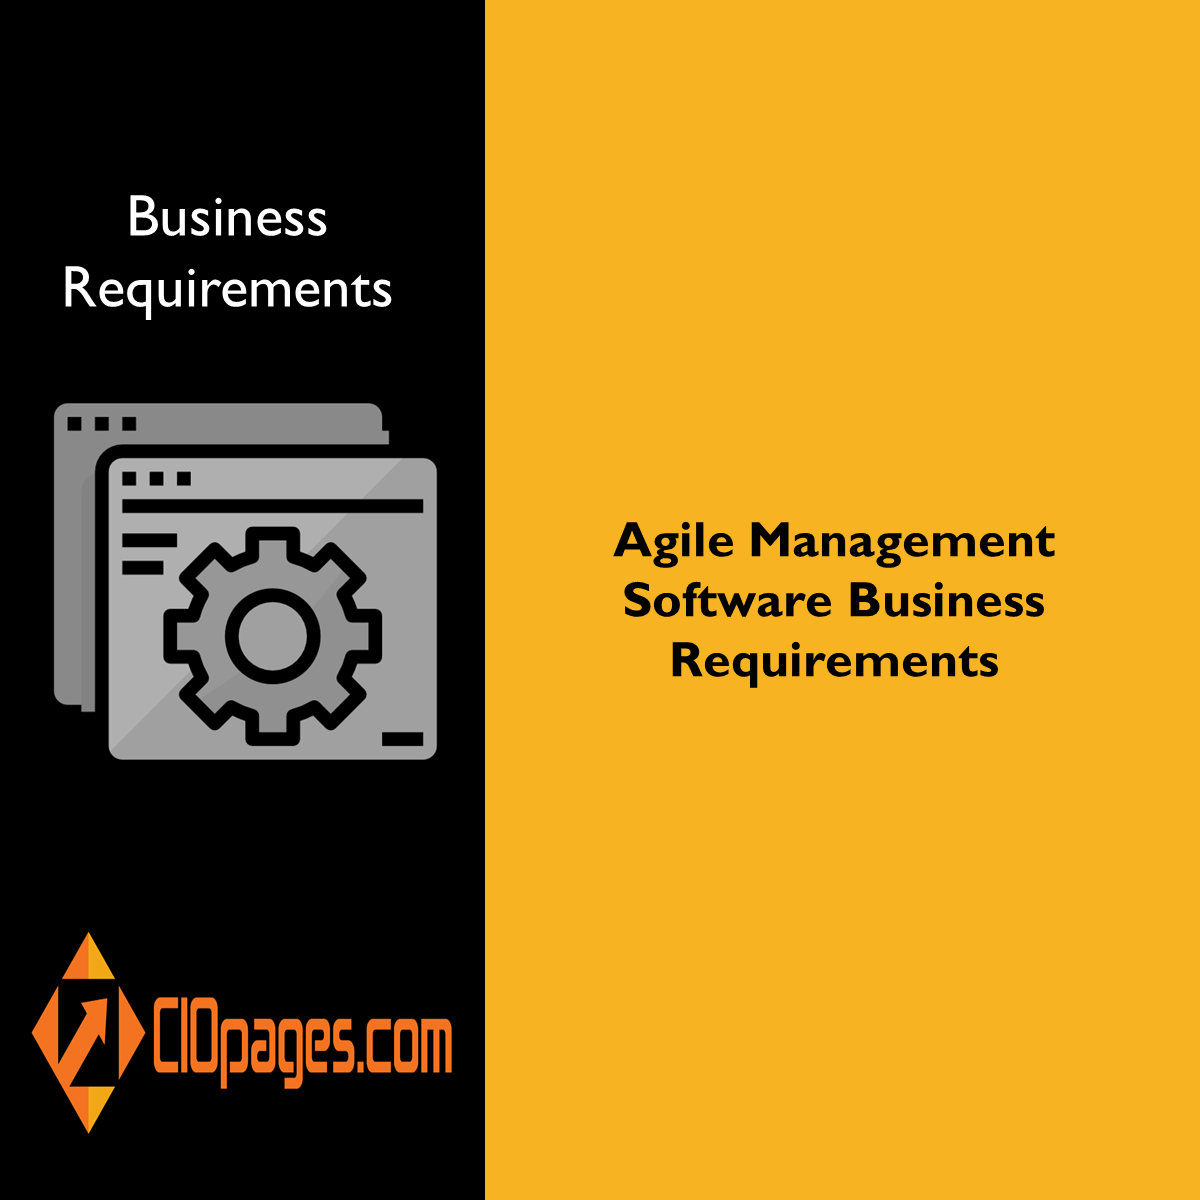 Agile Management Software Business Requirements